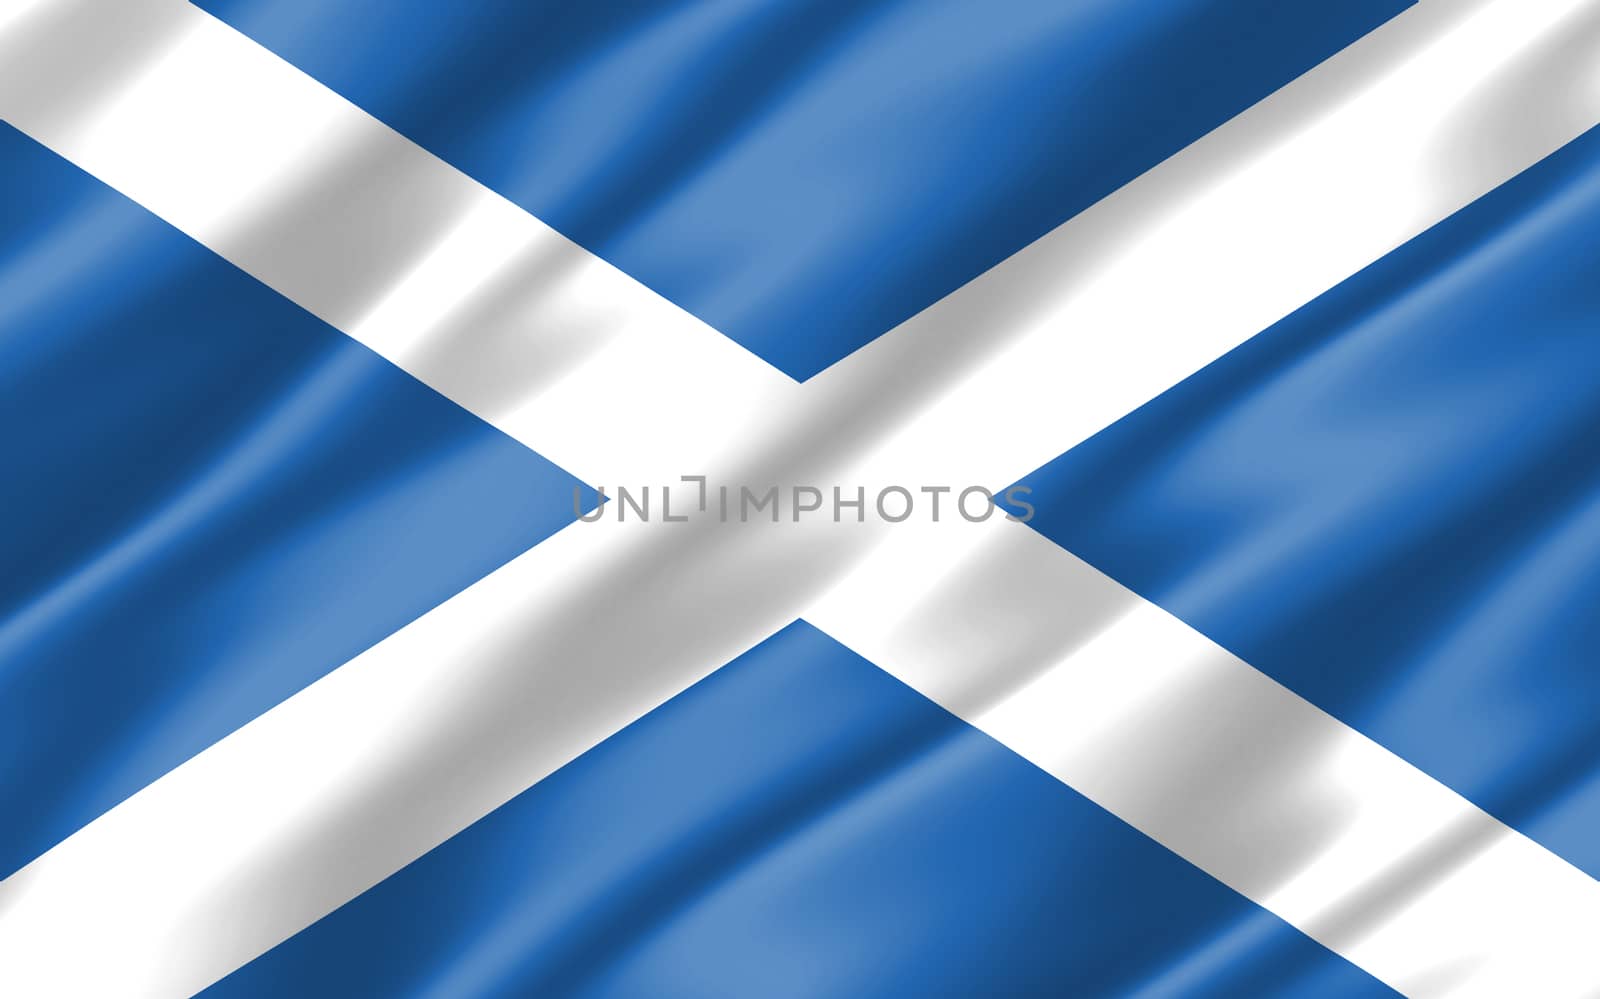 Silk wavy flag of Scotland graphic. Wavy Scottish flag illustration. Rippled Scotland country flag is a symbol of freedom, patriotism and independence.